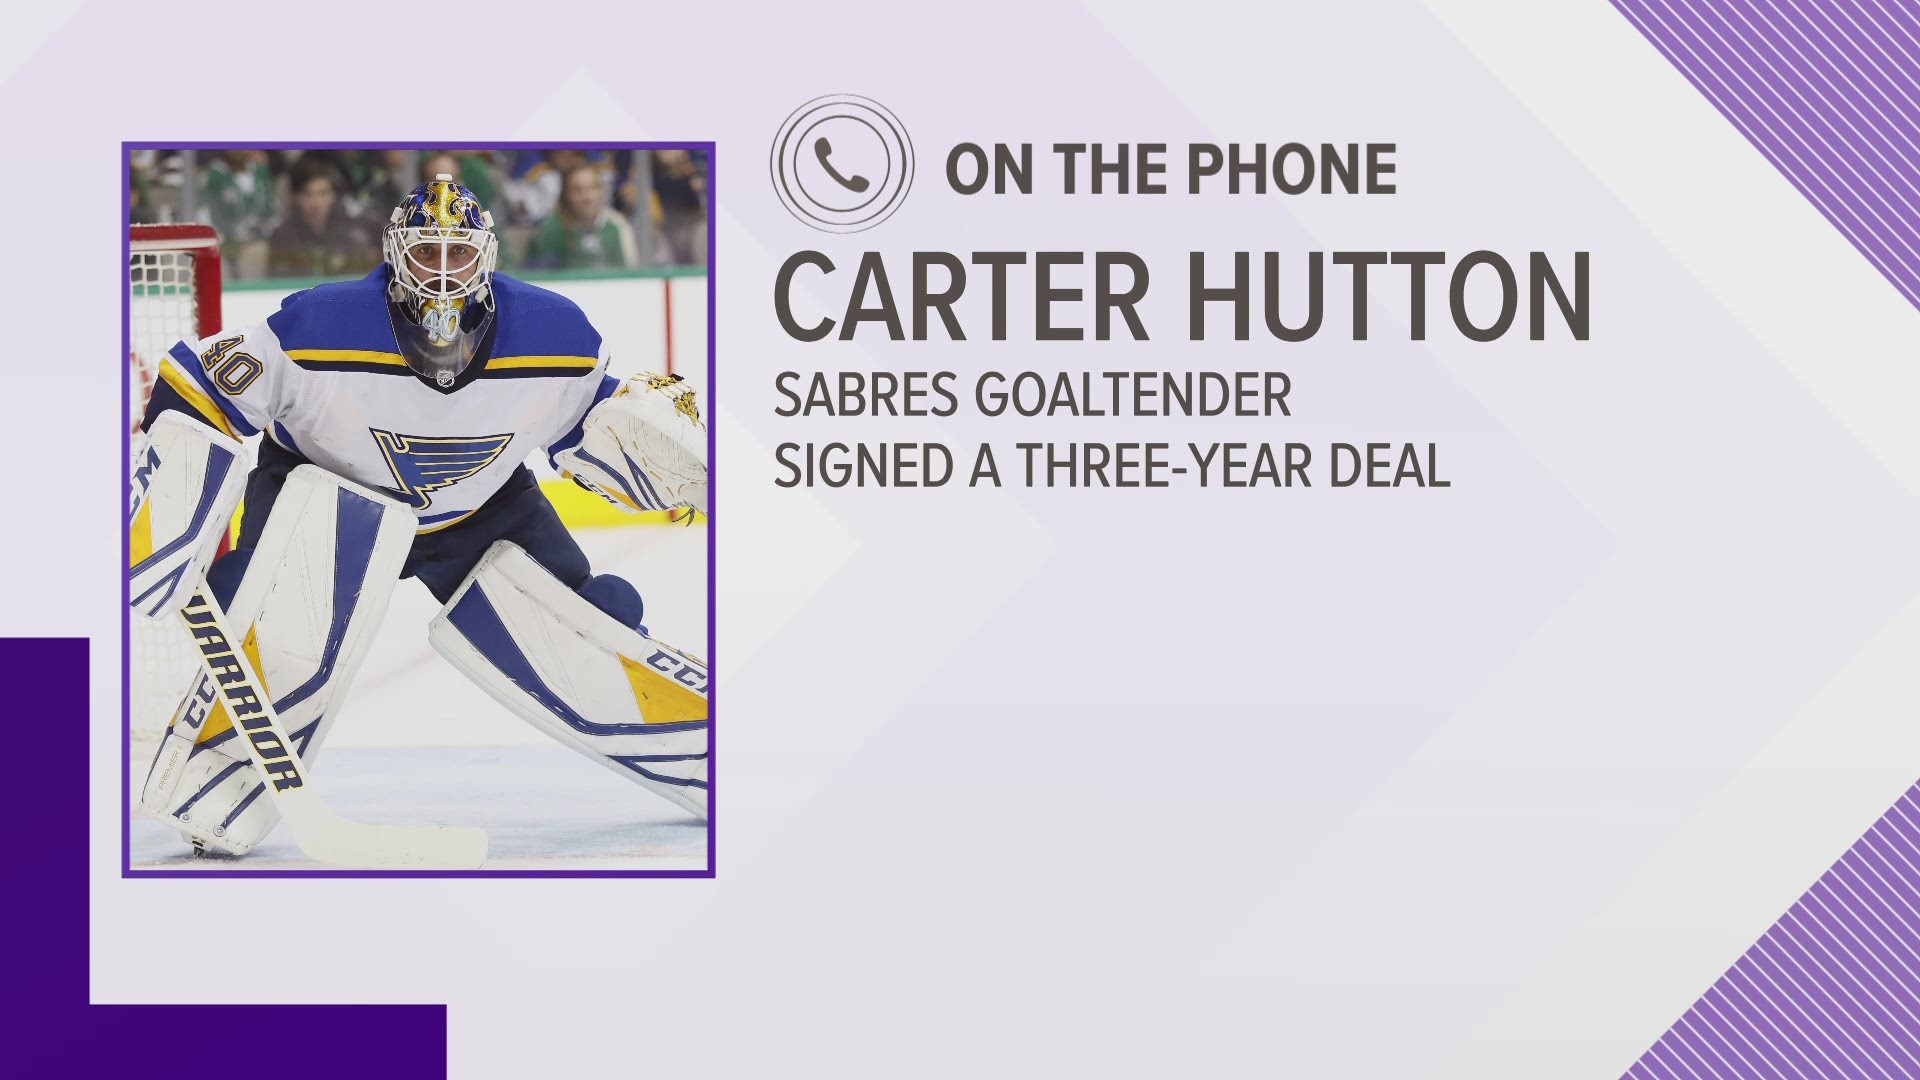 Carter Hutton excited to join Sabres